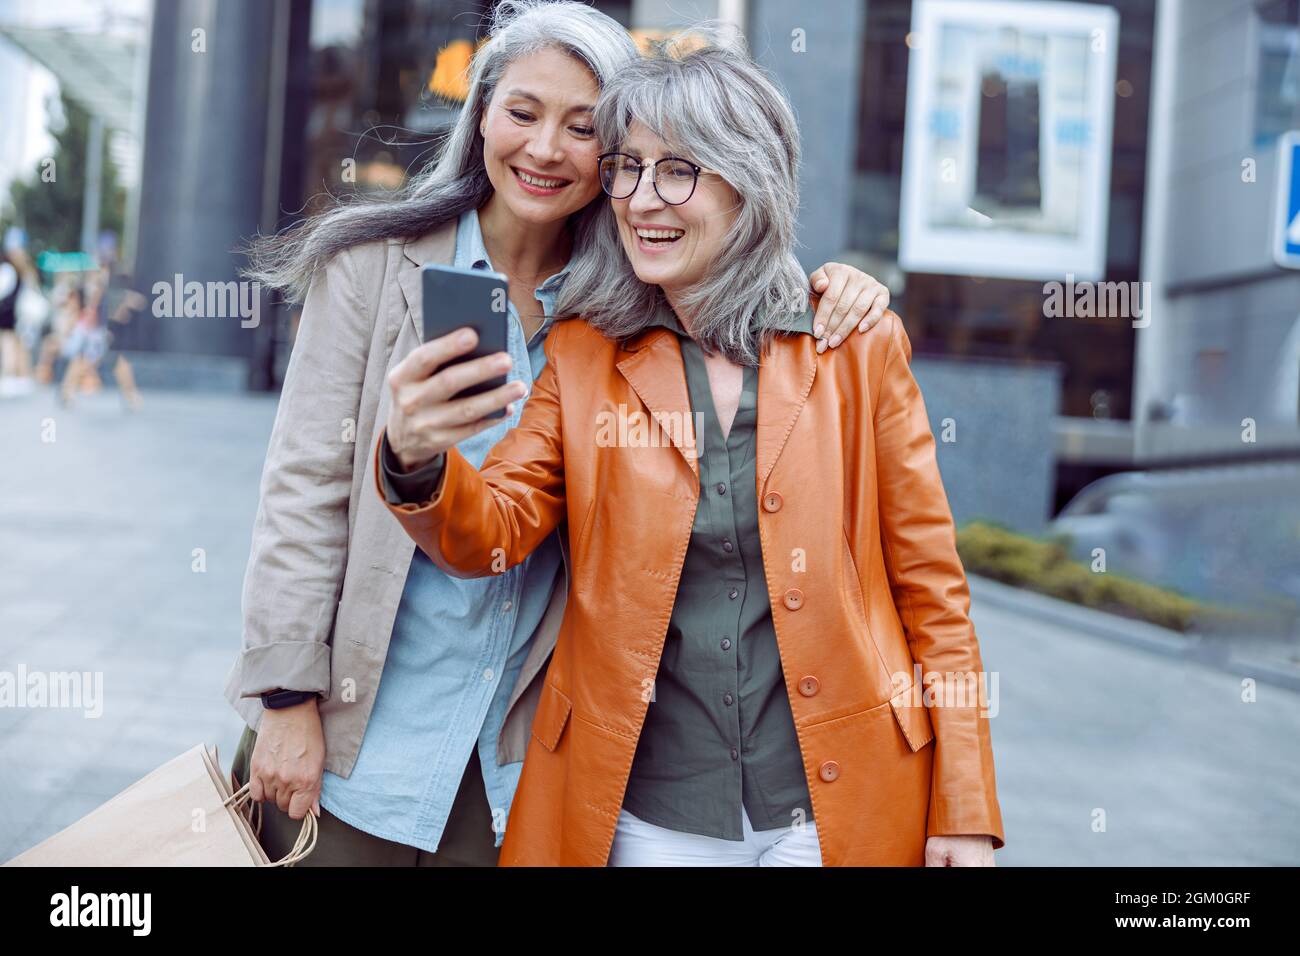 Smiling silver haired lady and companion with shopping bags take selfie on modern city street Stock Photo